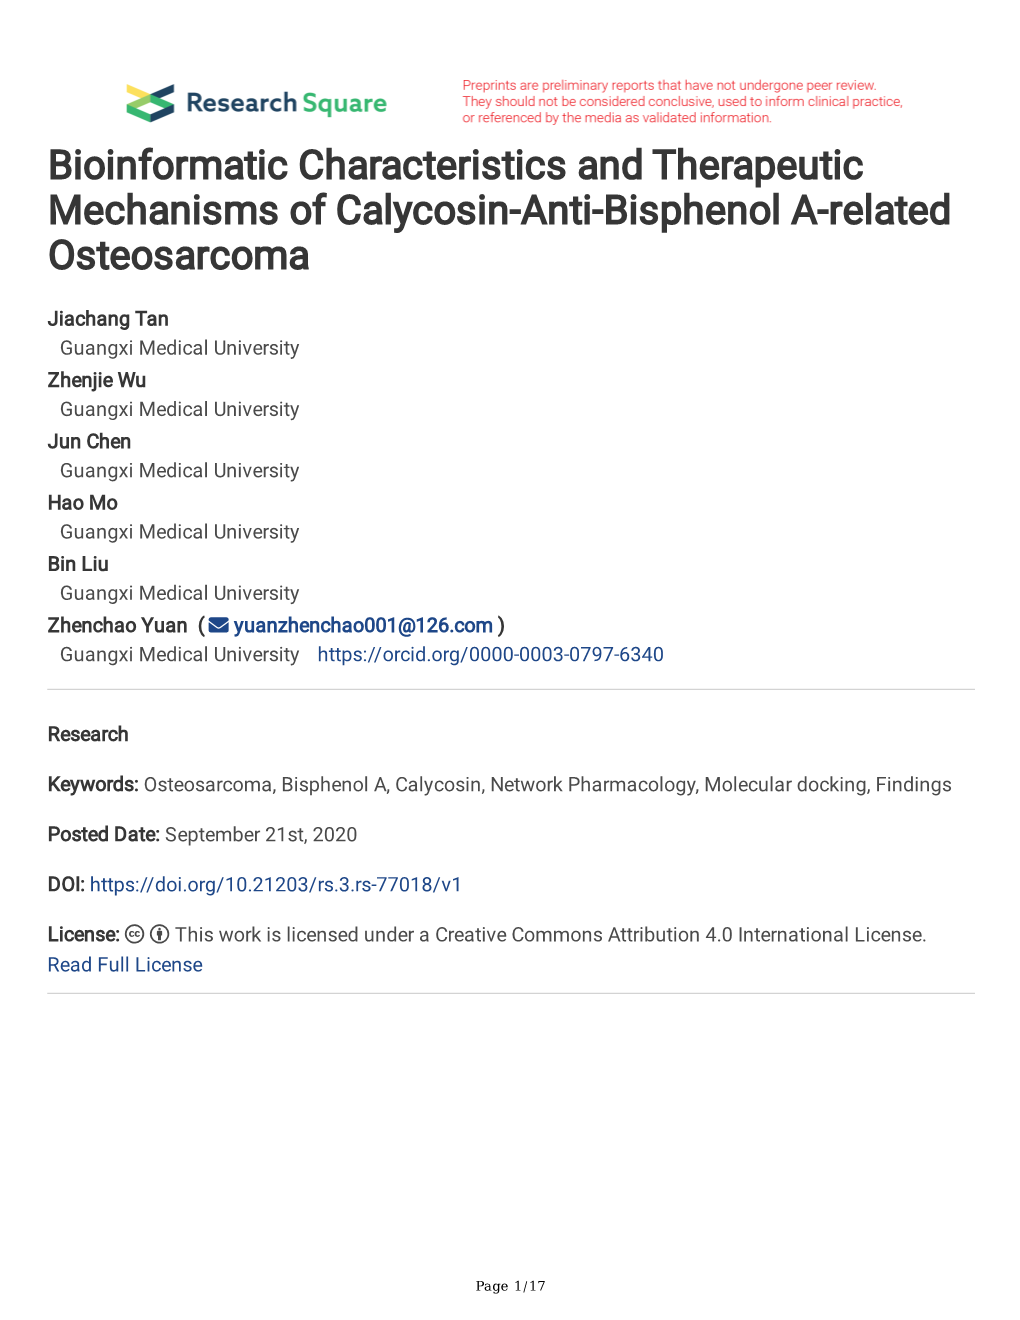 Bioinformatic Characteristics and Therapeutic Mechanisms of Calycosin-Anti-Bisphenol A-Related Osteosarcoma